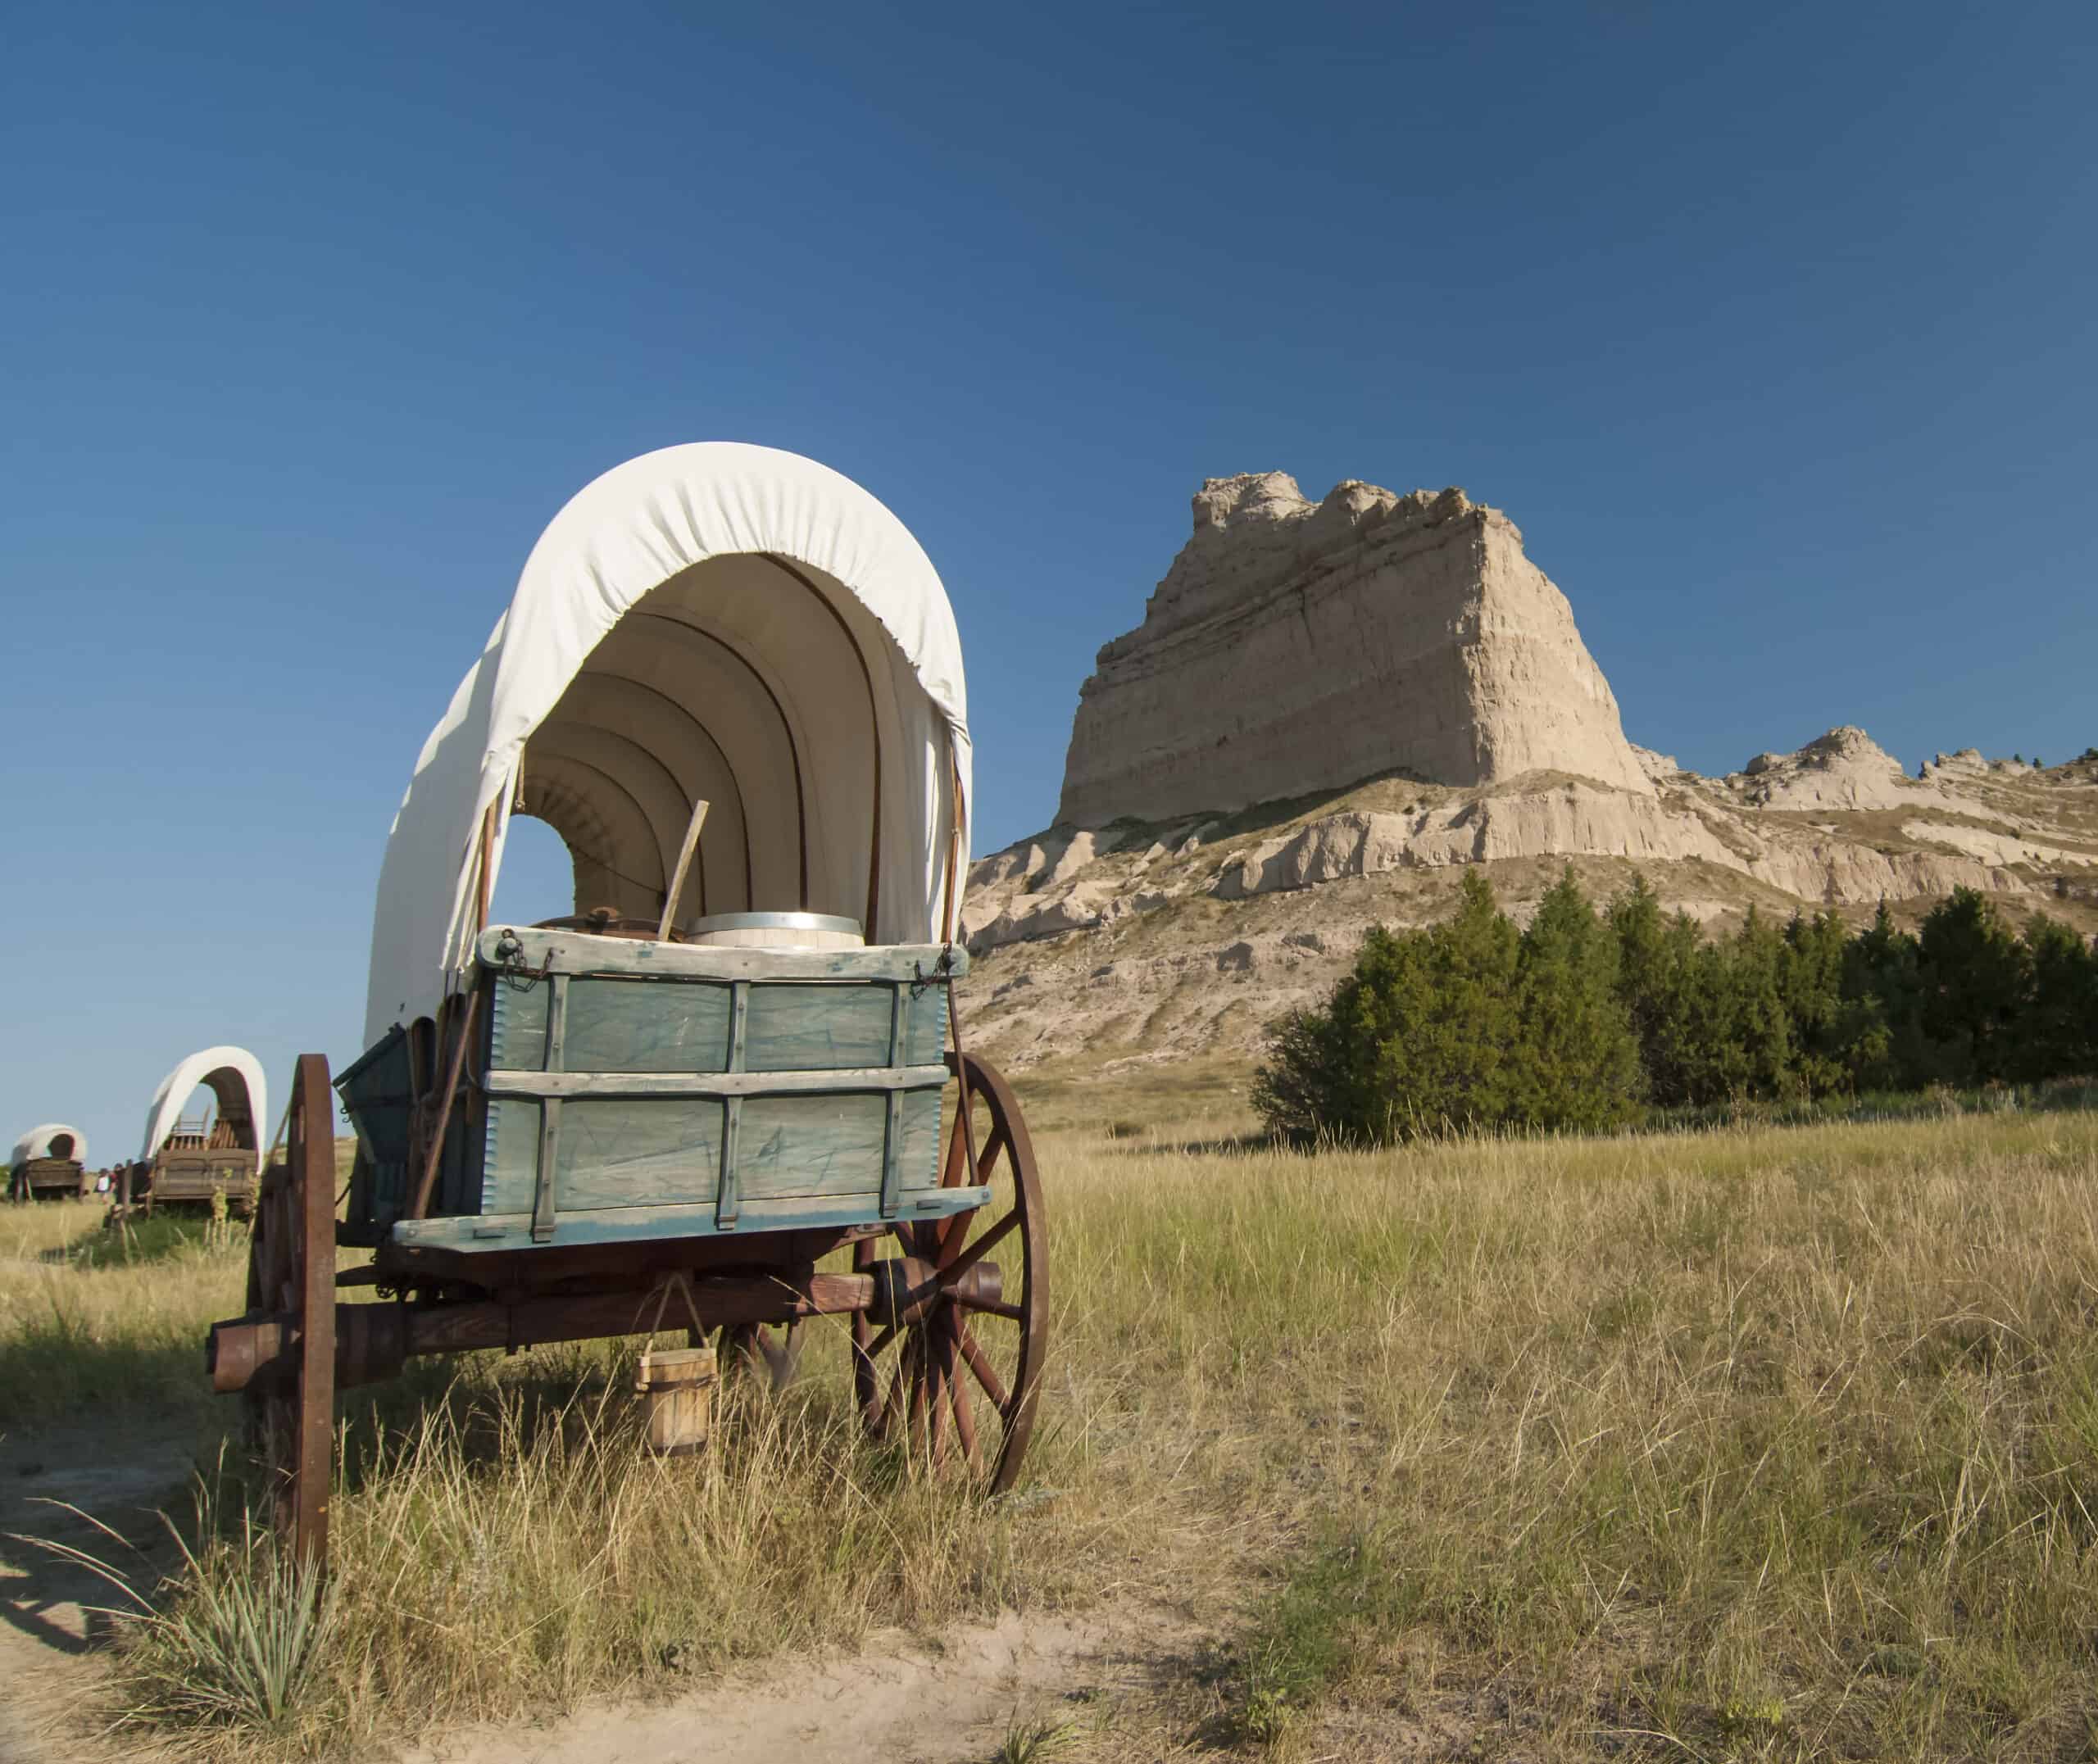 Covered Oregon Trail wagon exhibit at Scotts Bluff National Monument